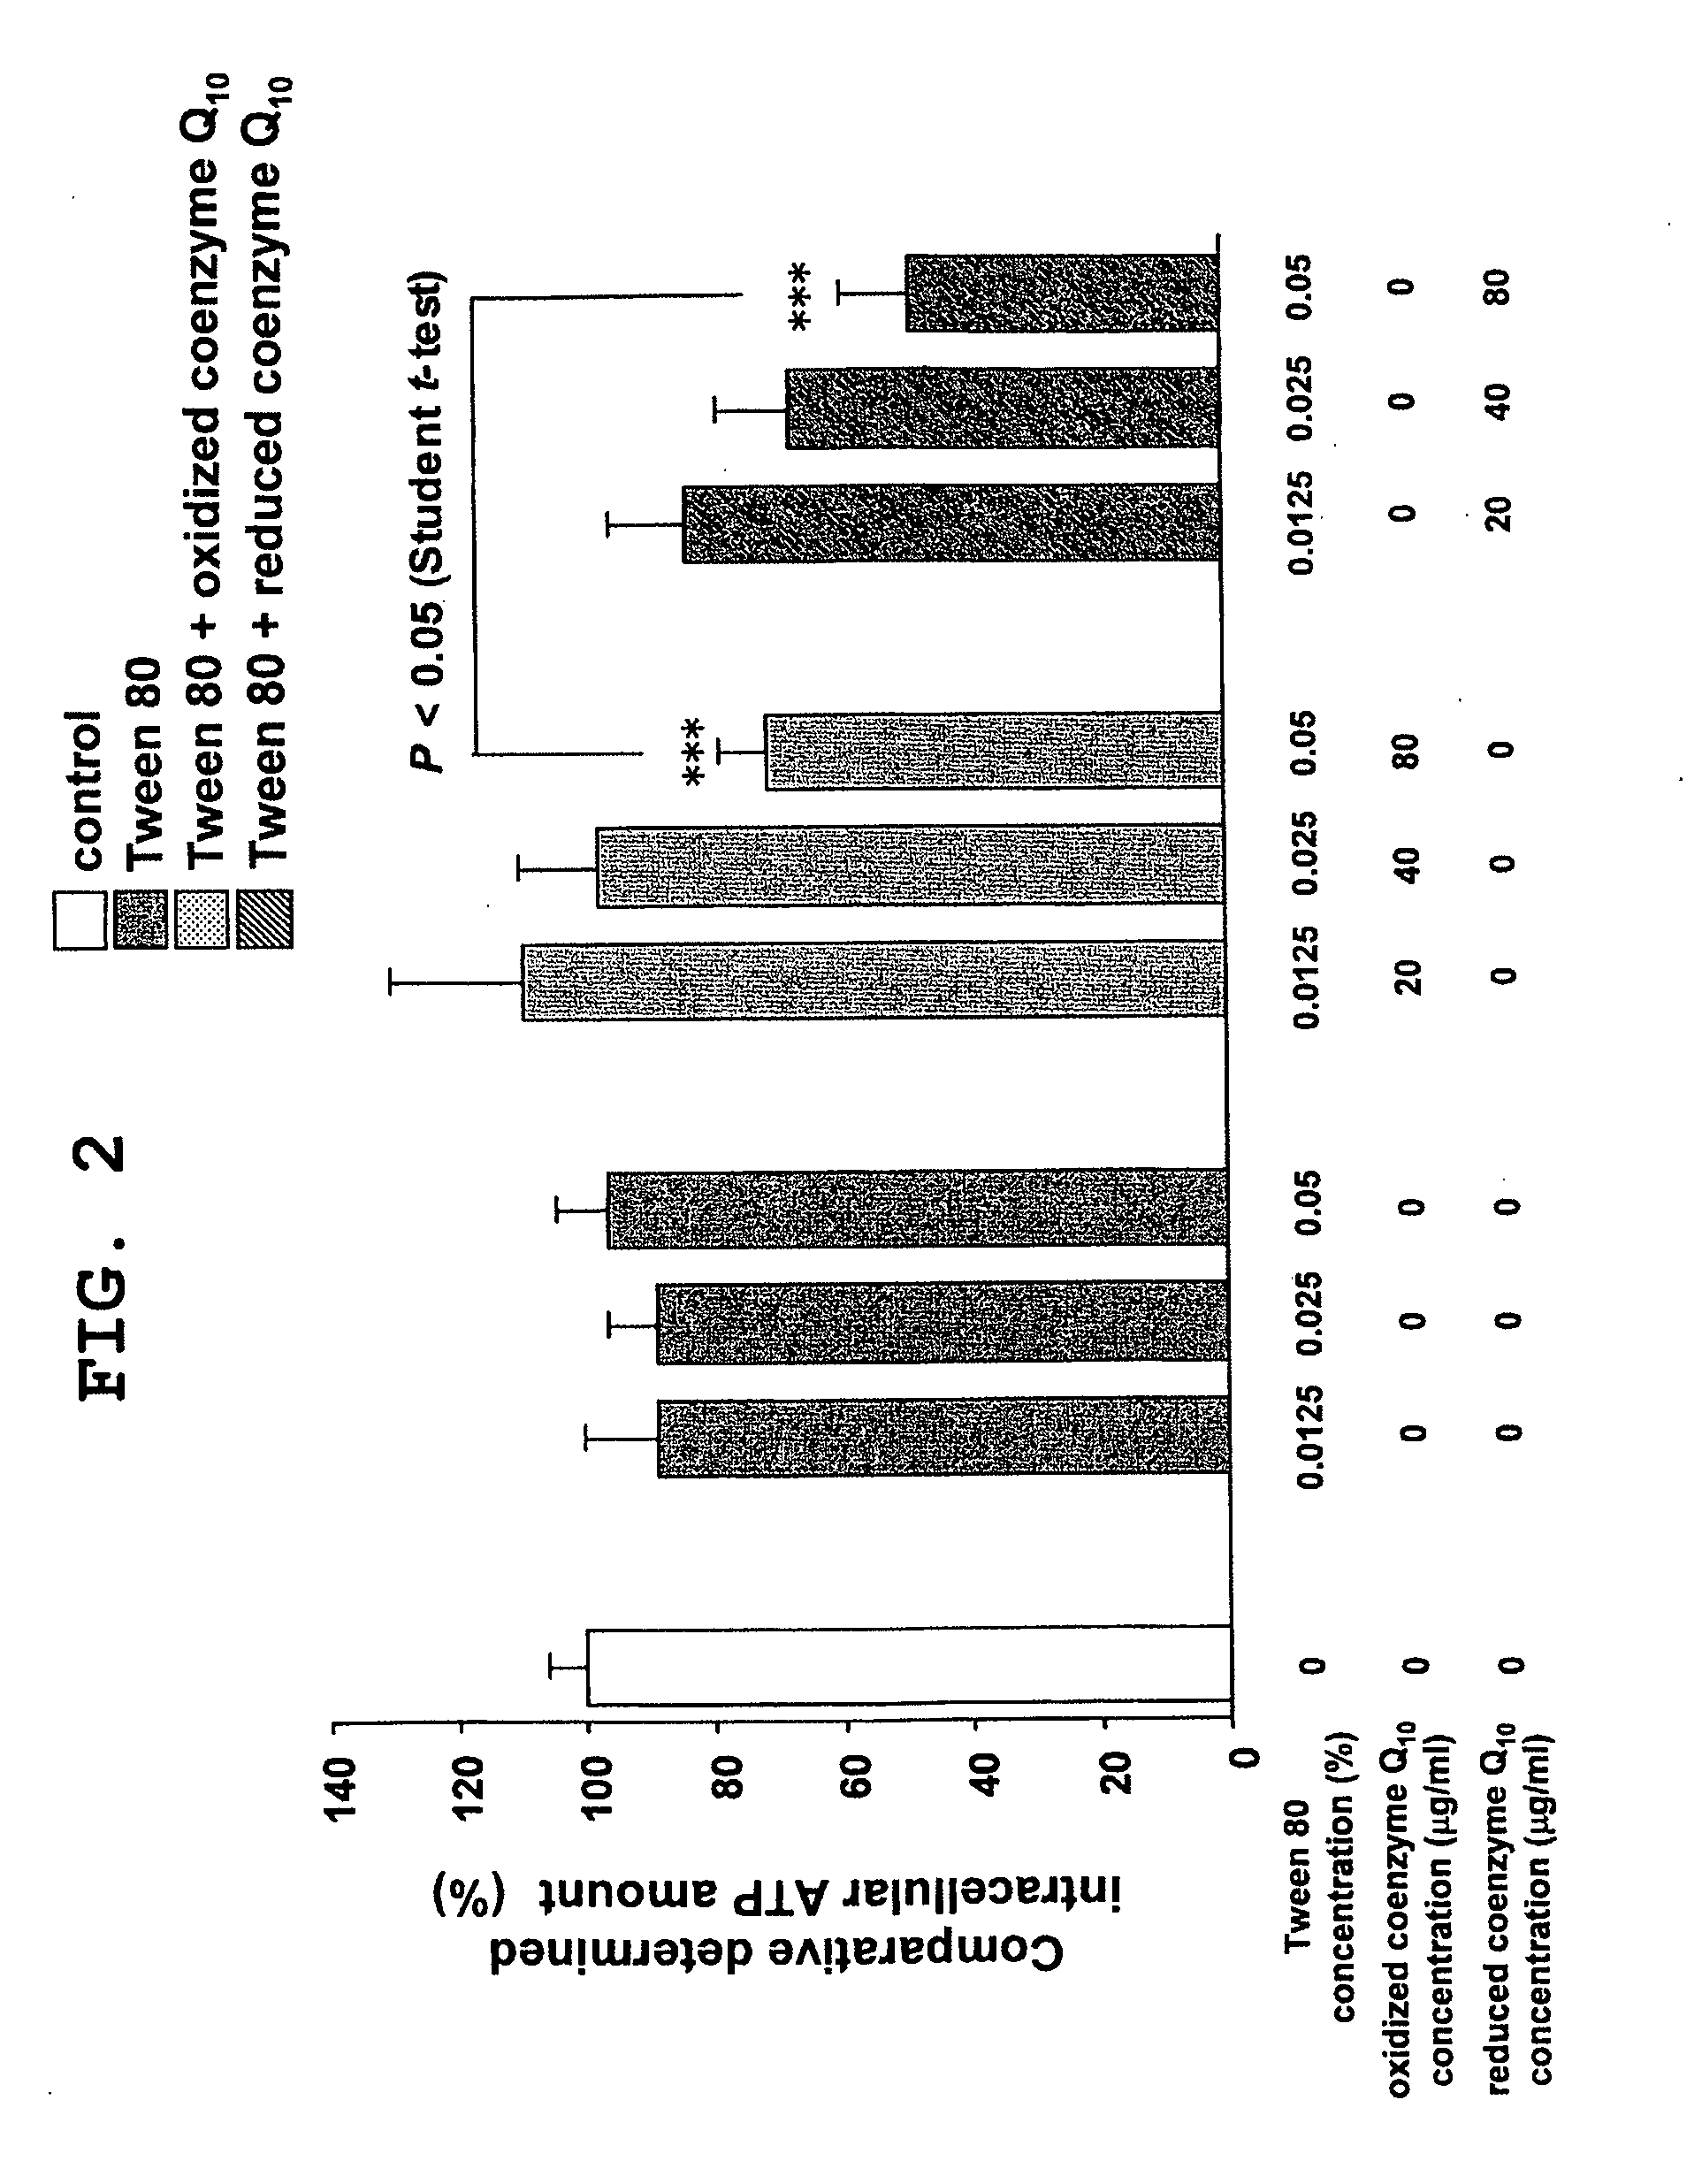 Method for cancer treatment, carcinogenesis suppression or mitigation of adverse reactions of anticancer agents